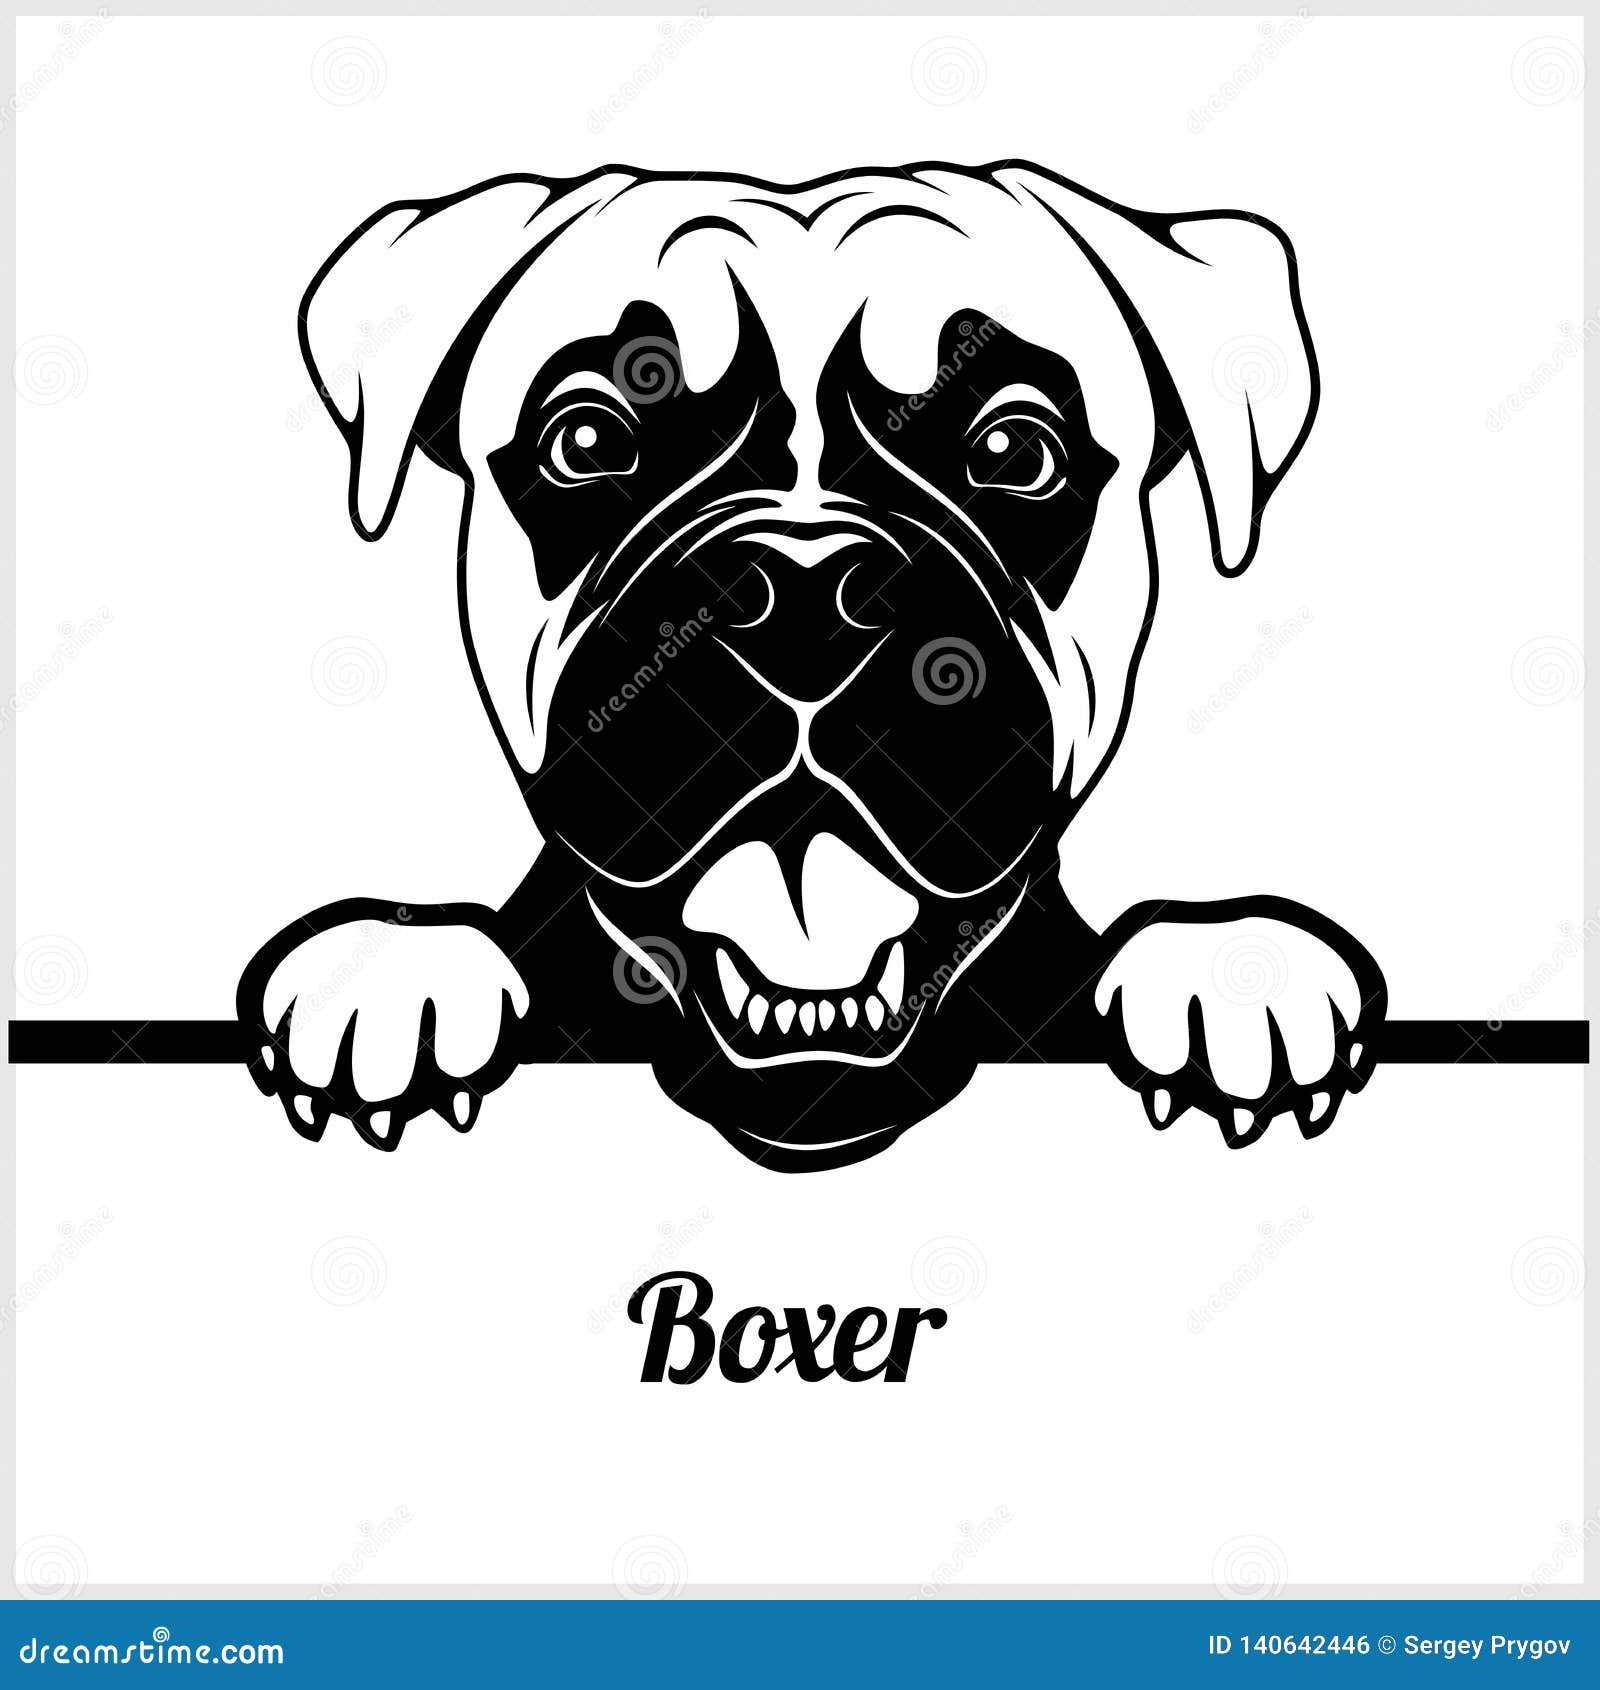 Boxer #4 Scarf Dog Breed Head Face Happy K9 Pedigree Smile Pup Puppy Design Element Art SVG EPS Logo PNG Vector Clipart Cutting Cut Cricut